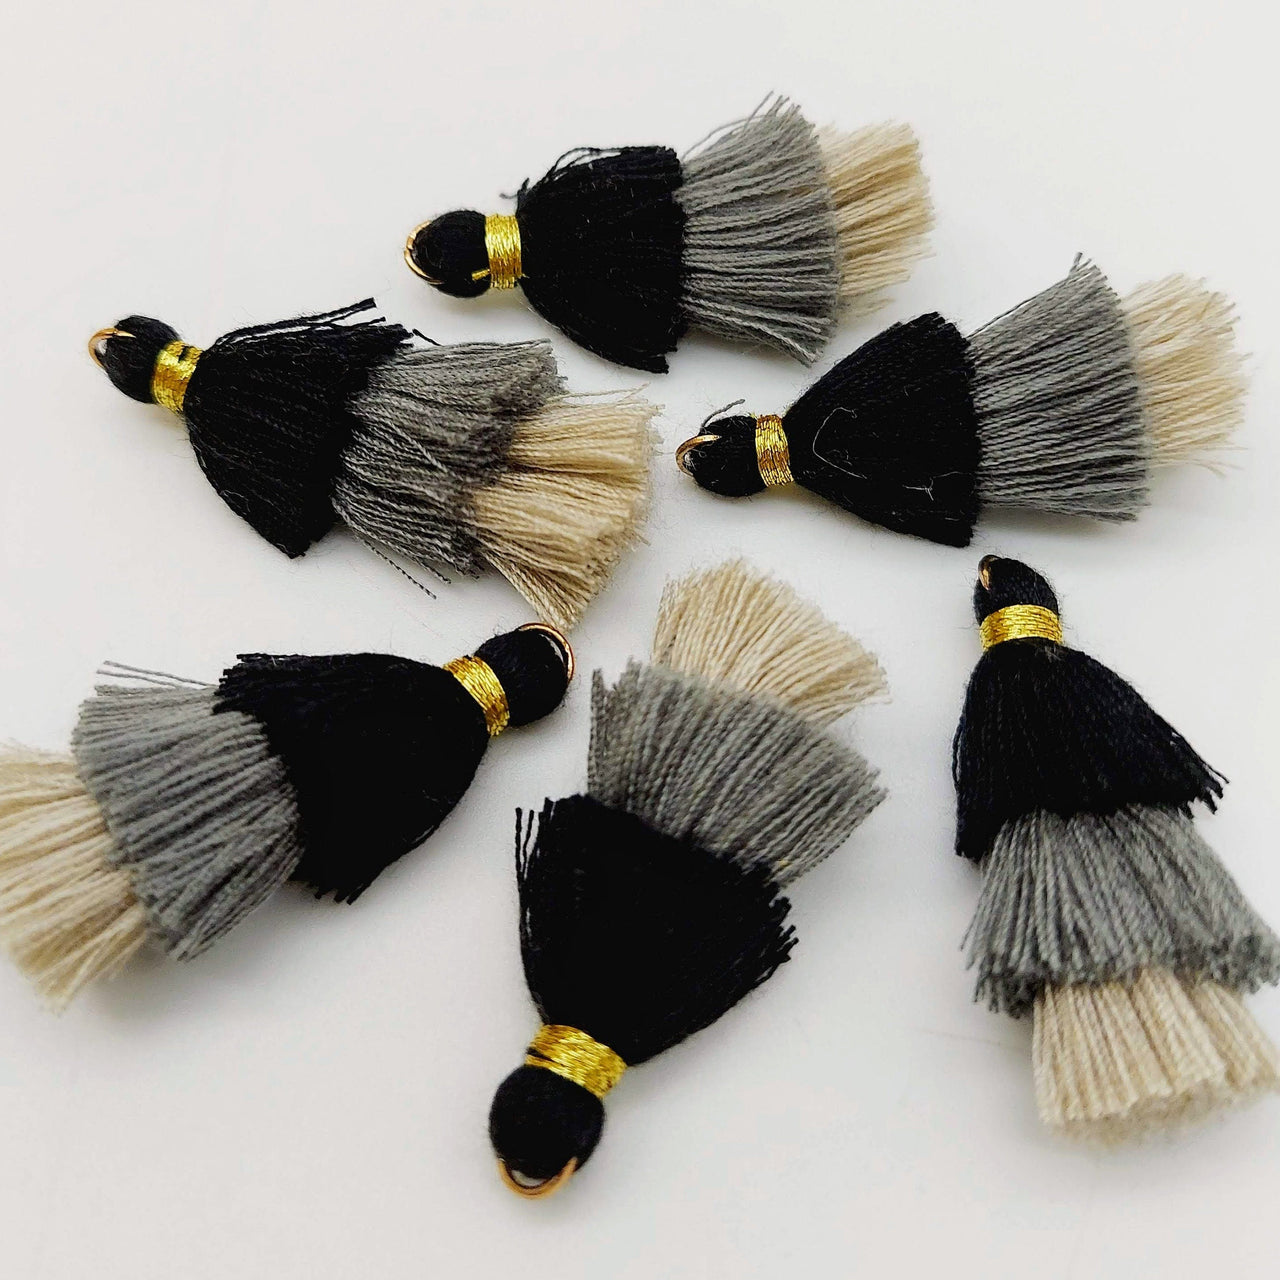 Black, Grey and Beige Small Cotton Tassels in Three Layers With Gold Colour Brass Loop Ring, Tassel Charms x 5